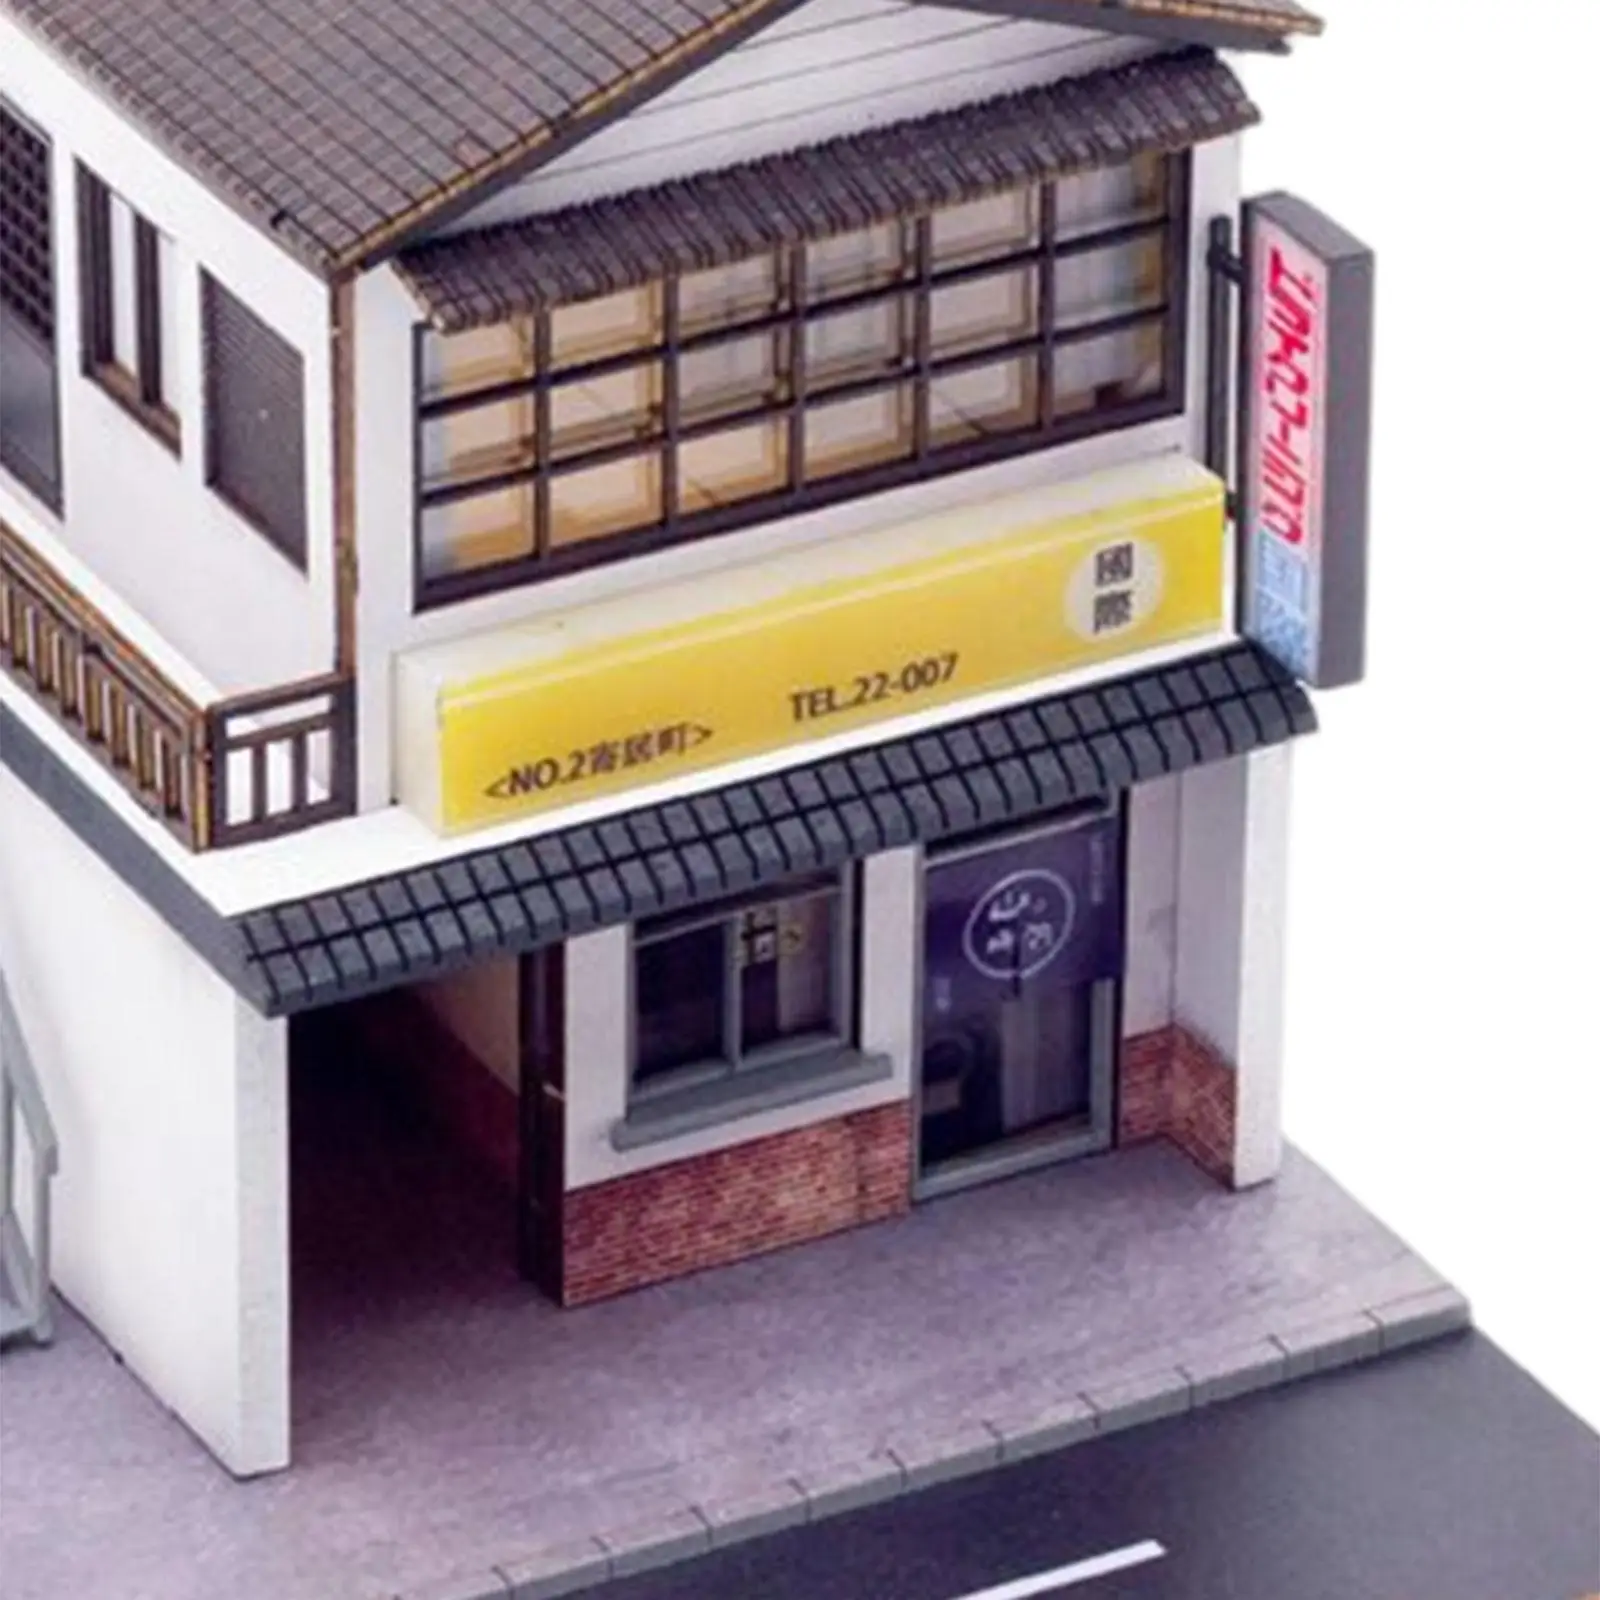 Miniature 1:64 Scale Dry Cleaners Diorama Scenery Collection Gifts Desktop Scene Toy City DIY Model Layout Decoration